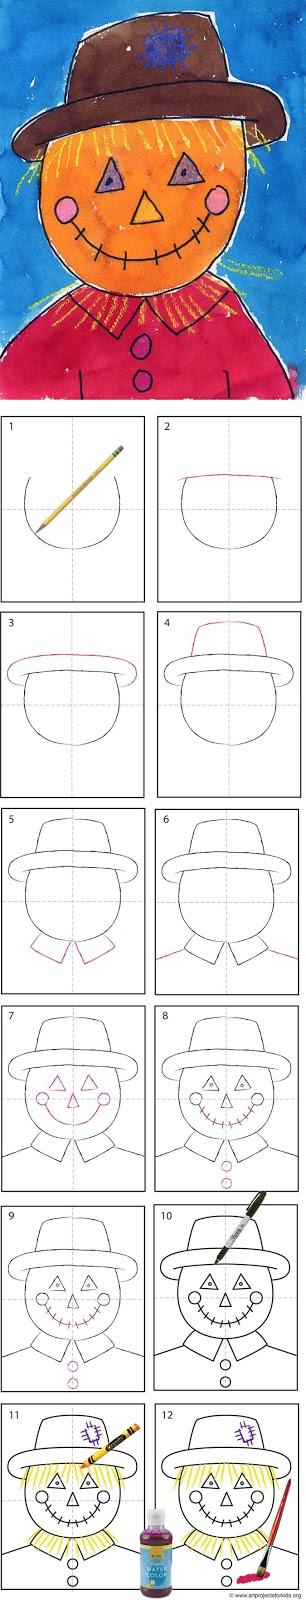 How to Draw a Scarecrow Tutorial - Paperblog